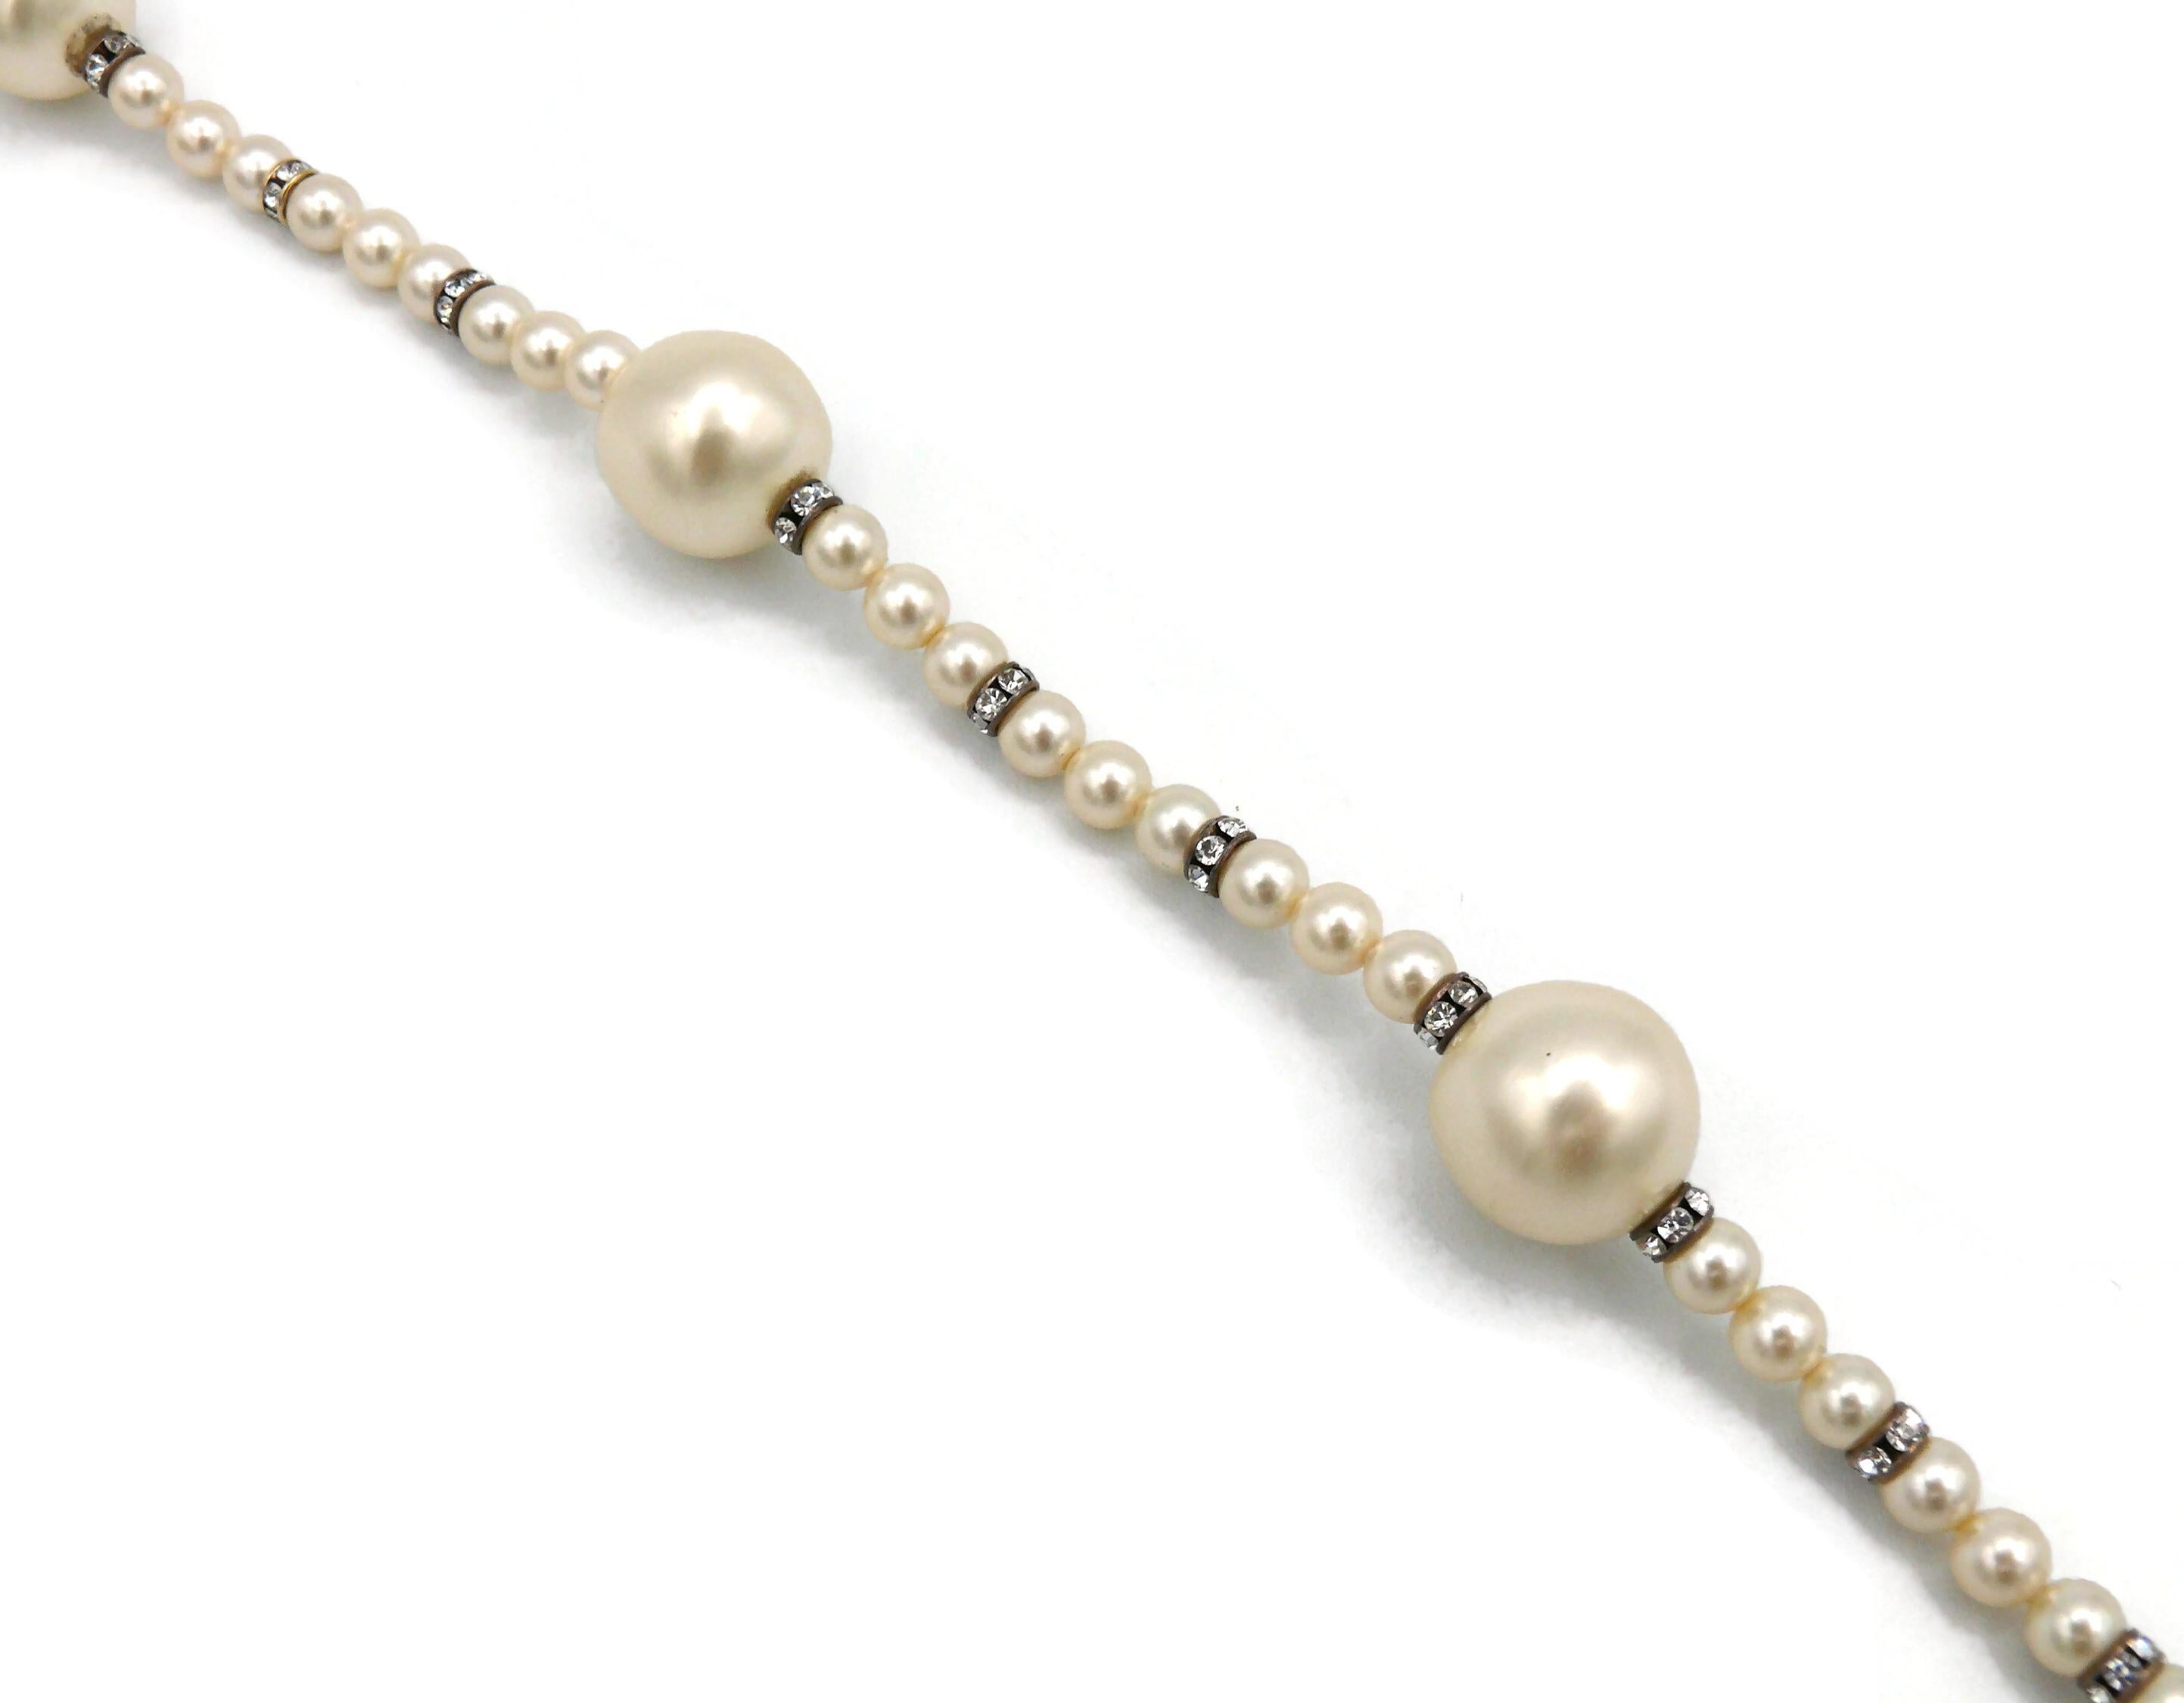 CHANEL by KARL LAGERFELD Vintage Faux Pearl and Crystal Necklace, Fall 1993 For Sale 5